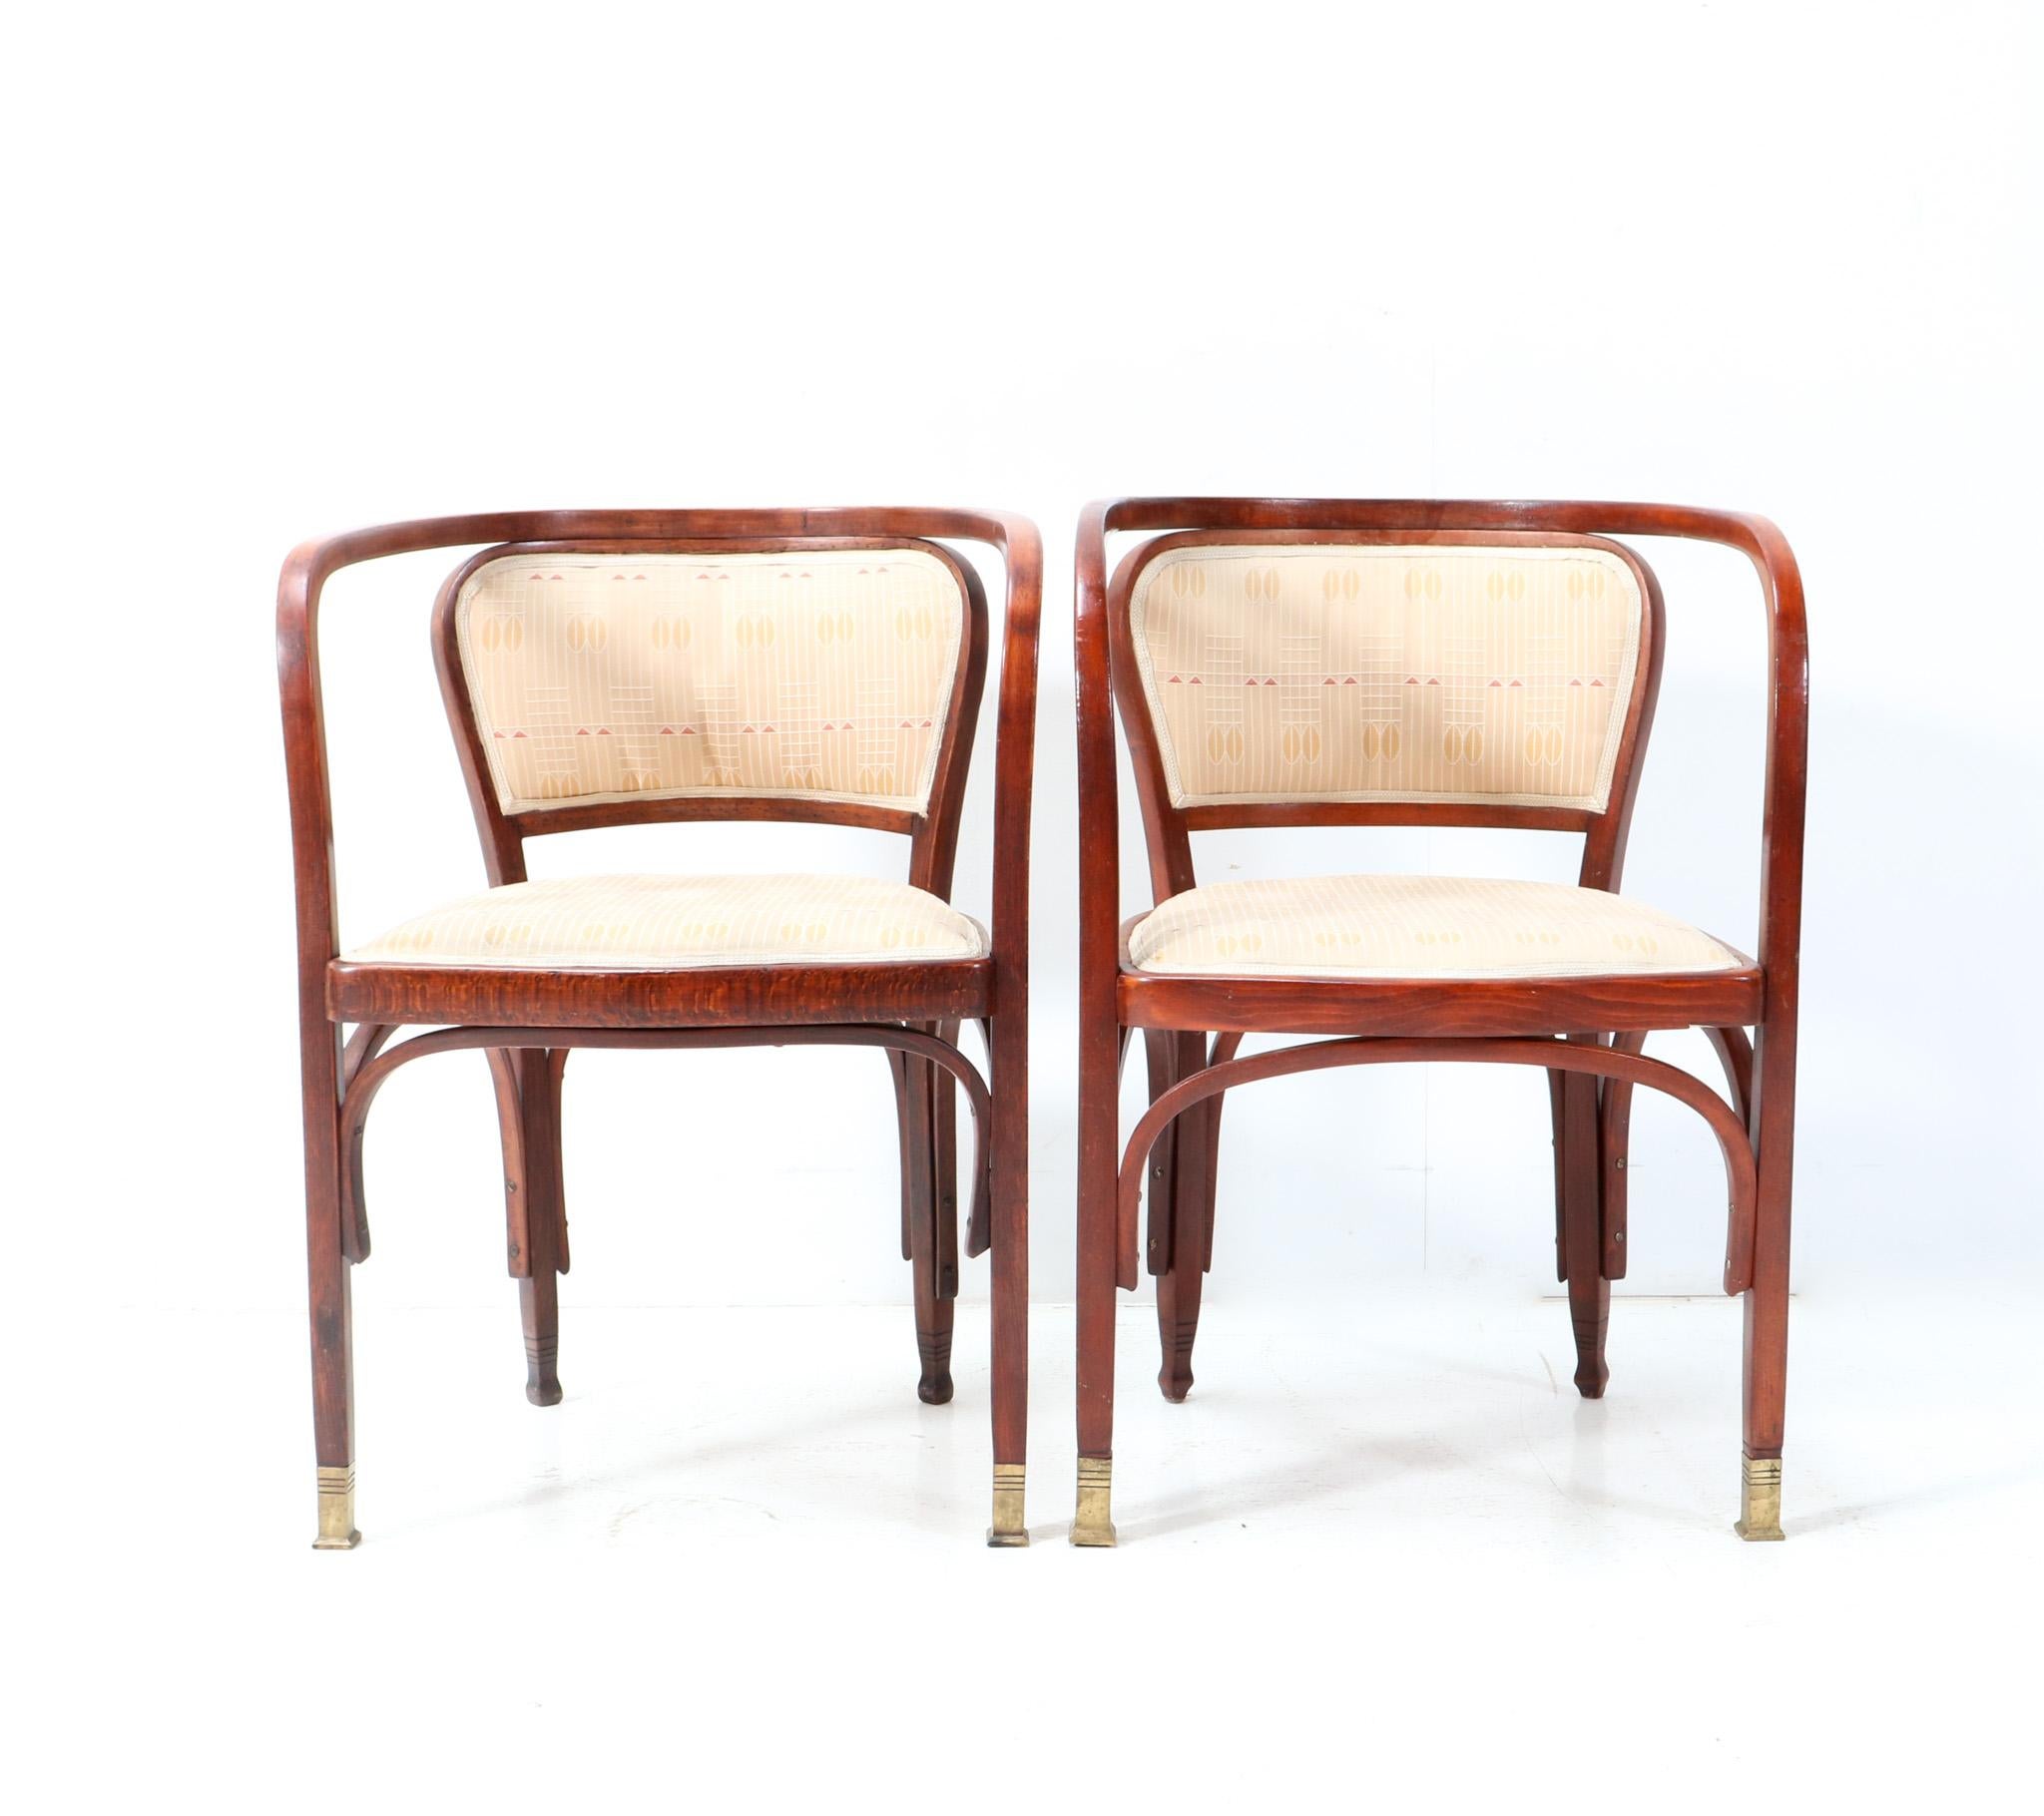 Eight Vienna Secession Armchairs by Gustav Siegel for Jacob & Josef Kohn, 1900s For Sale 2